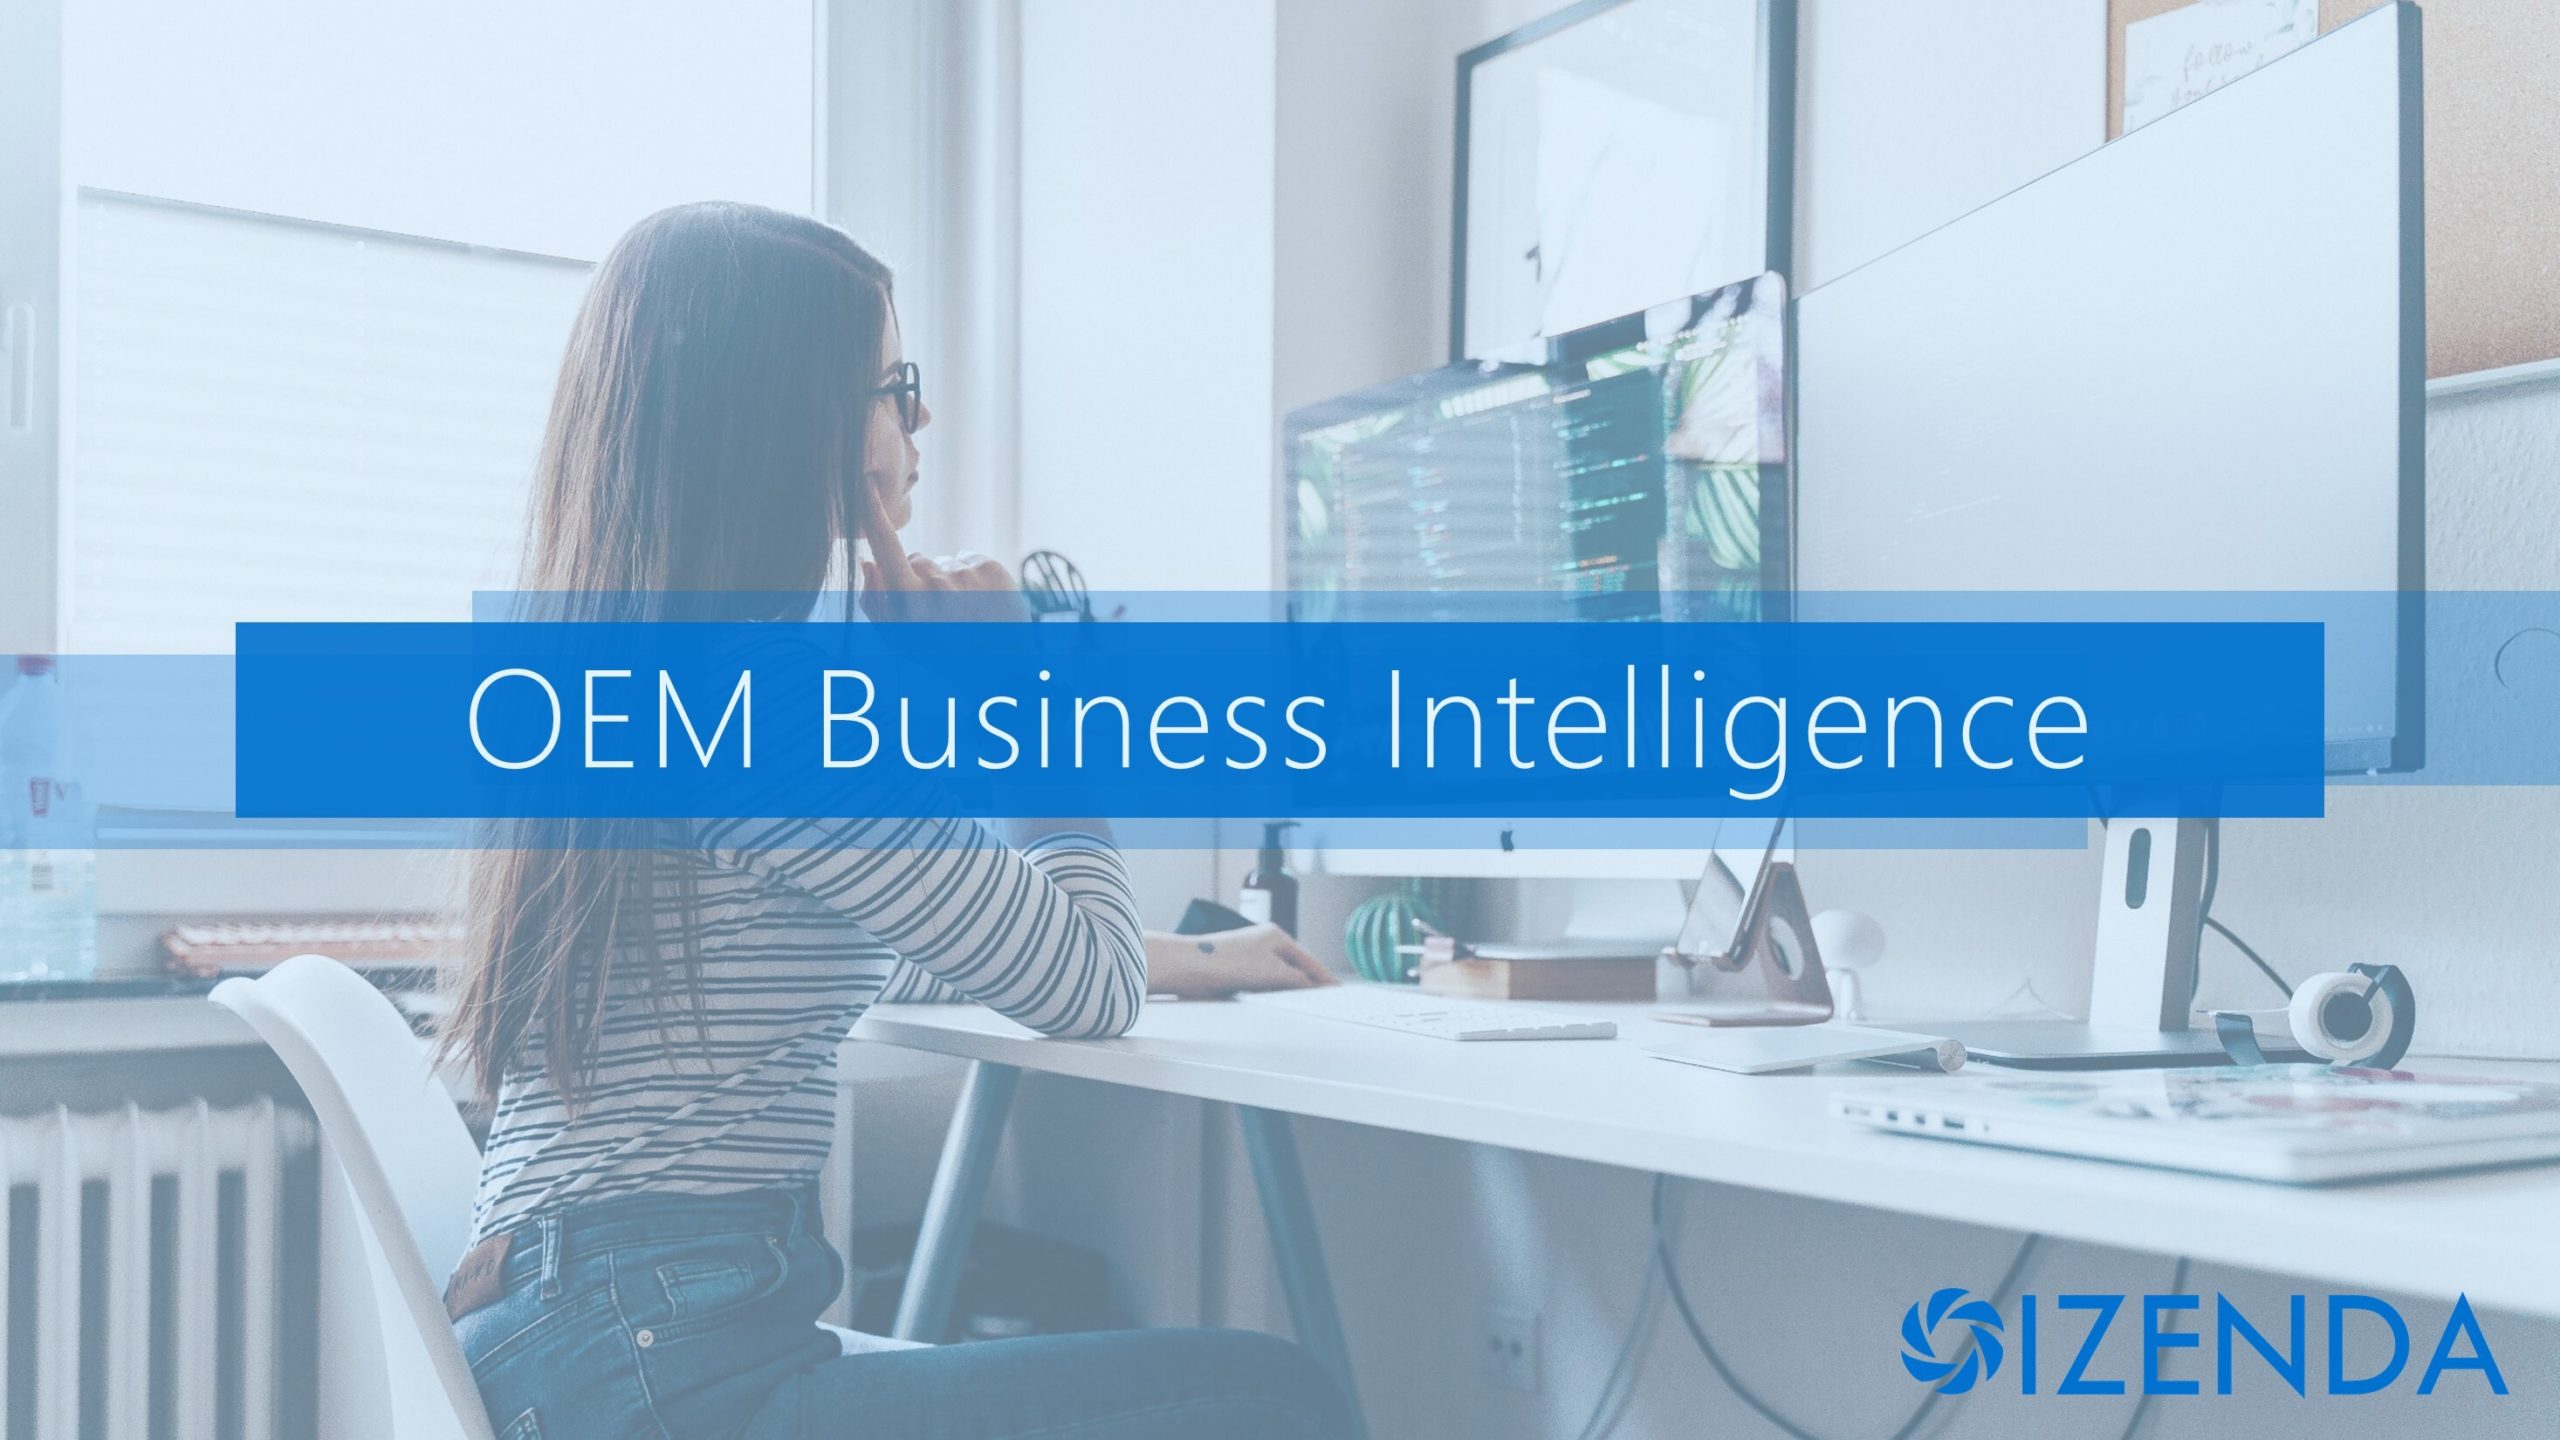 oem business intelligence dashboards and reports from izenda